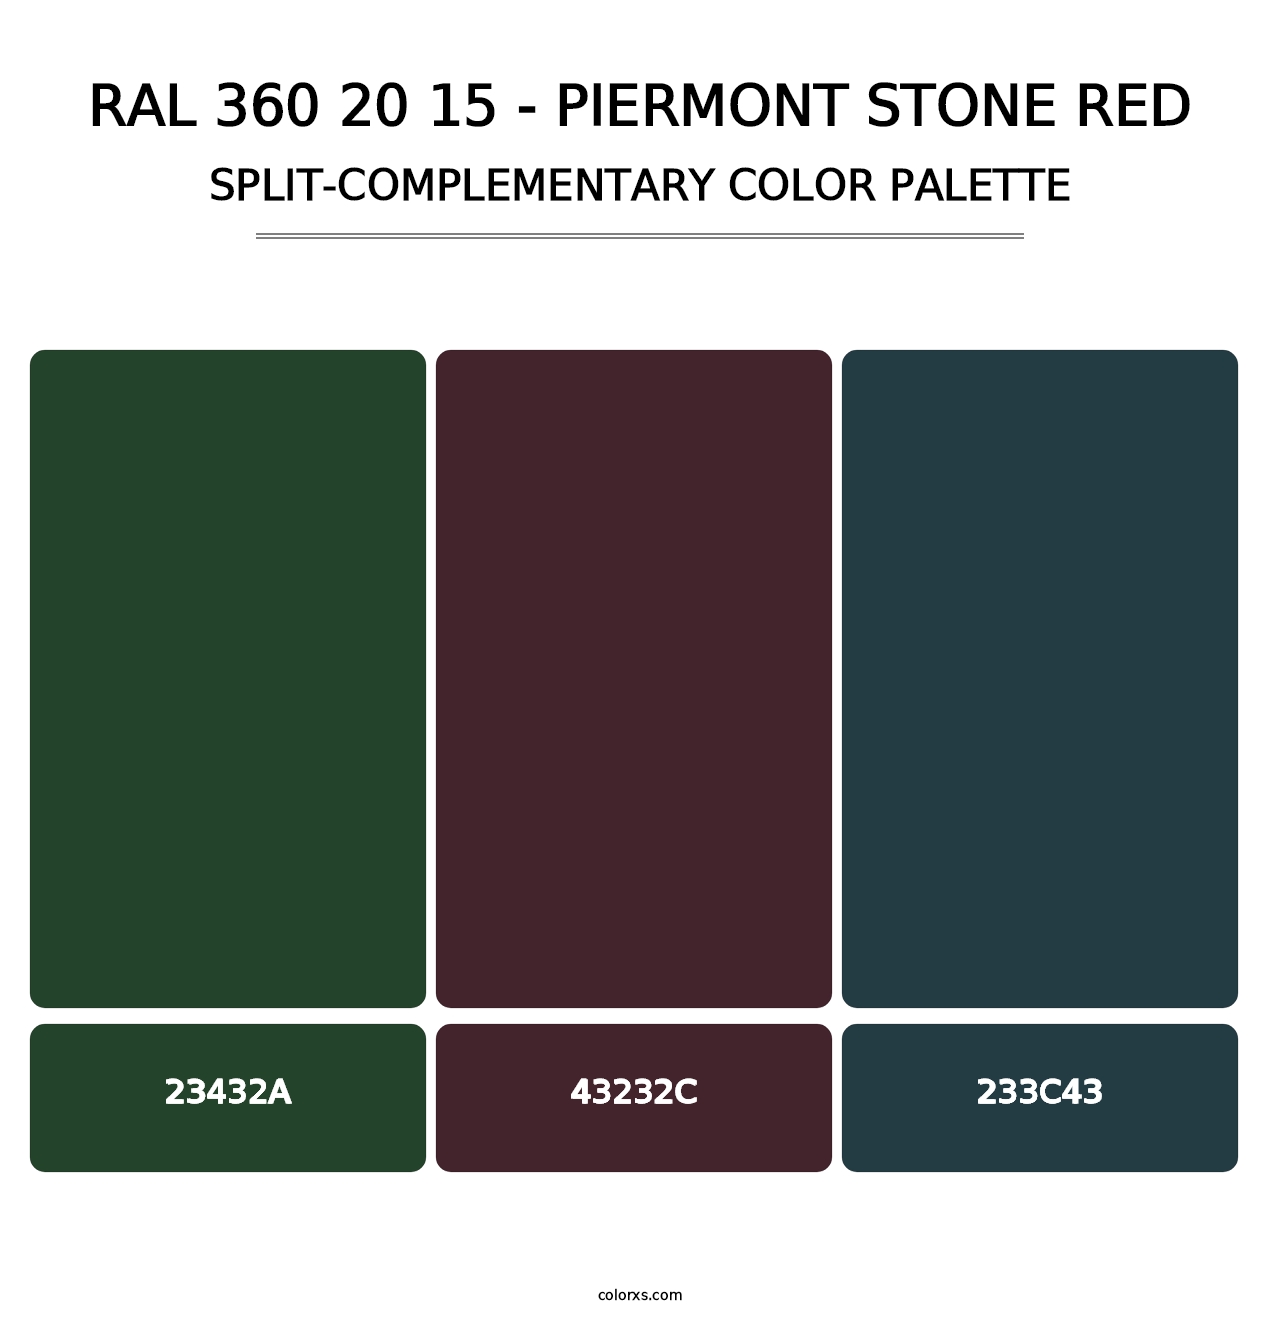 RAL 360 20 15 - Piermont Stone Red - Split-Complementary Color Palette